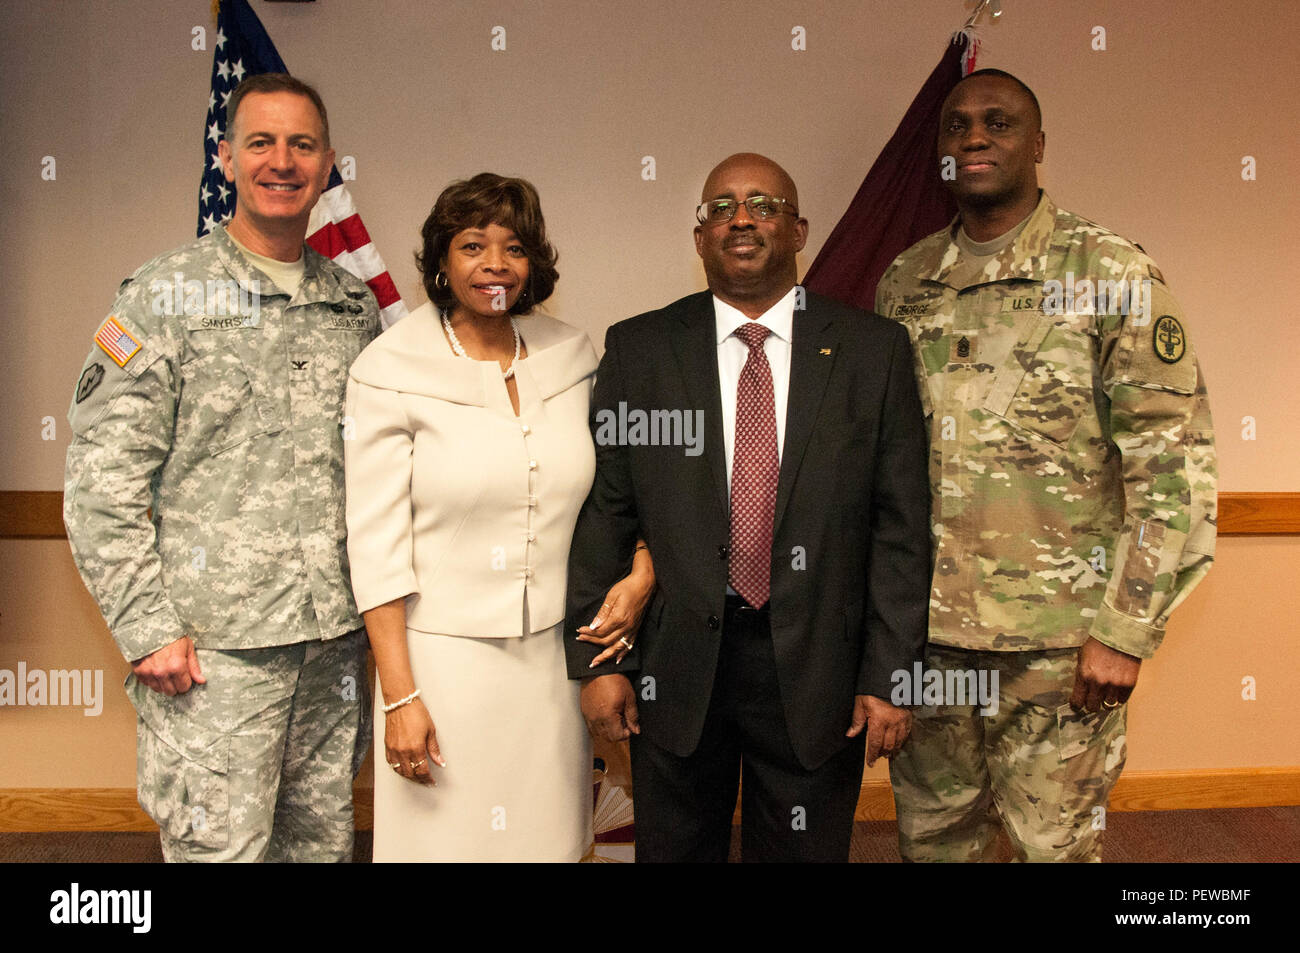 (From left to right) Col. John A. Smyrski III, commander, William Beaumont Army Medical Center, Merllyn Price, the Rev. James O. Price, Jr. and Command Sgt. Maj. Donald George, command sergeant major, WBAMC, pose for a picture during WBAMC's observance in remembrance of Dr. Martin Luther King, Jr. at WBAMC, Jan. 21. The observance welcomed Price, who was himself a civil rights activist in the 60s while growing up in Atlanta, as a guest speaker for the Soldiers and staff of WBAMC. Stock Photo